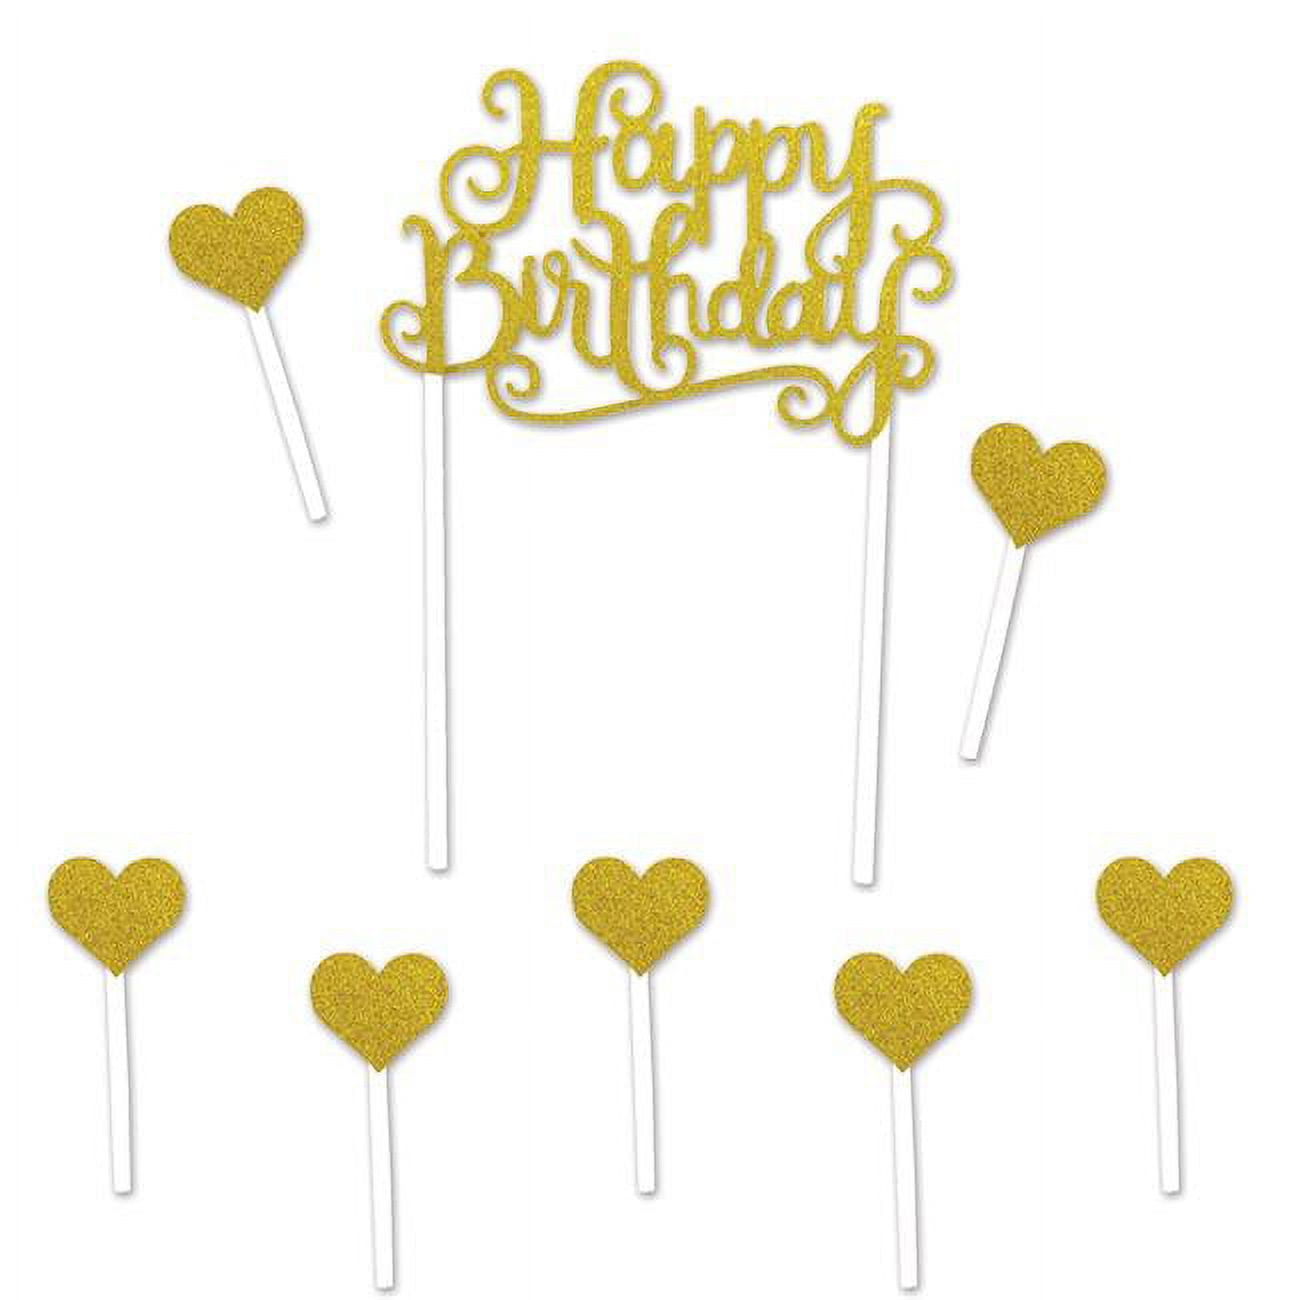 Picture of Beistle 52216 Happy Birthday Cake Topper, Gold - Pack of 12